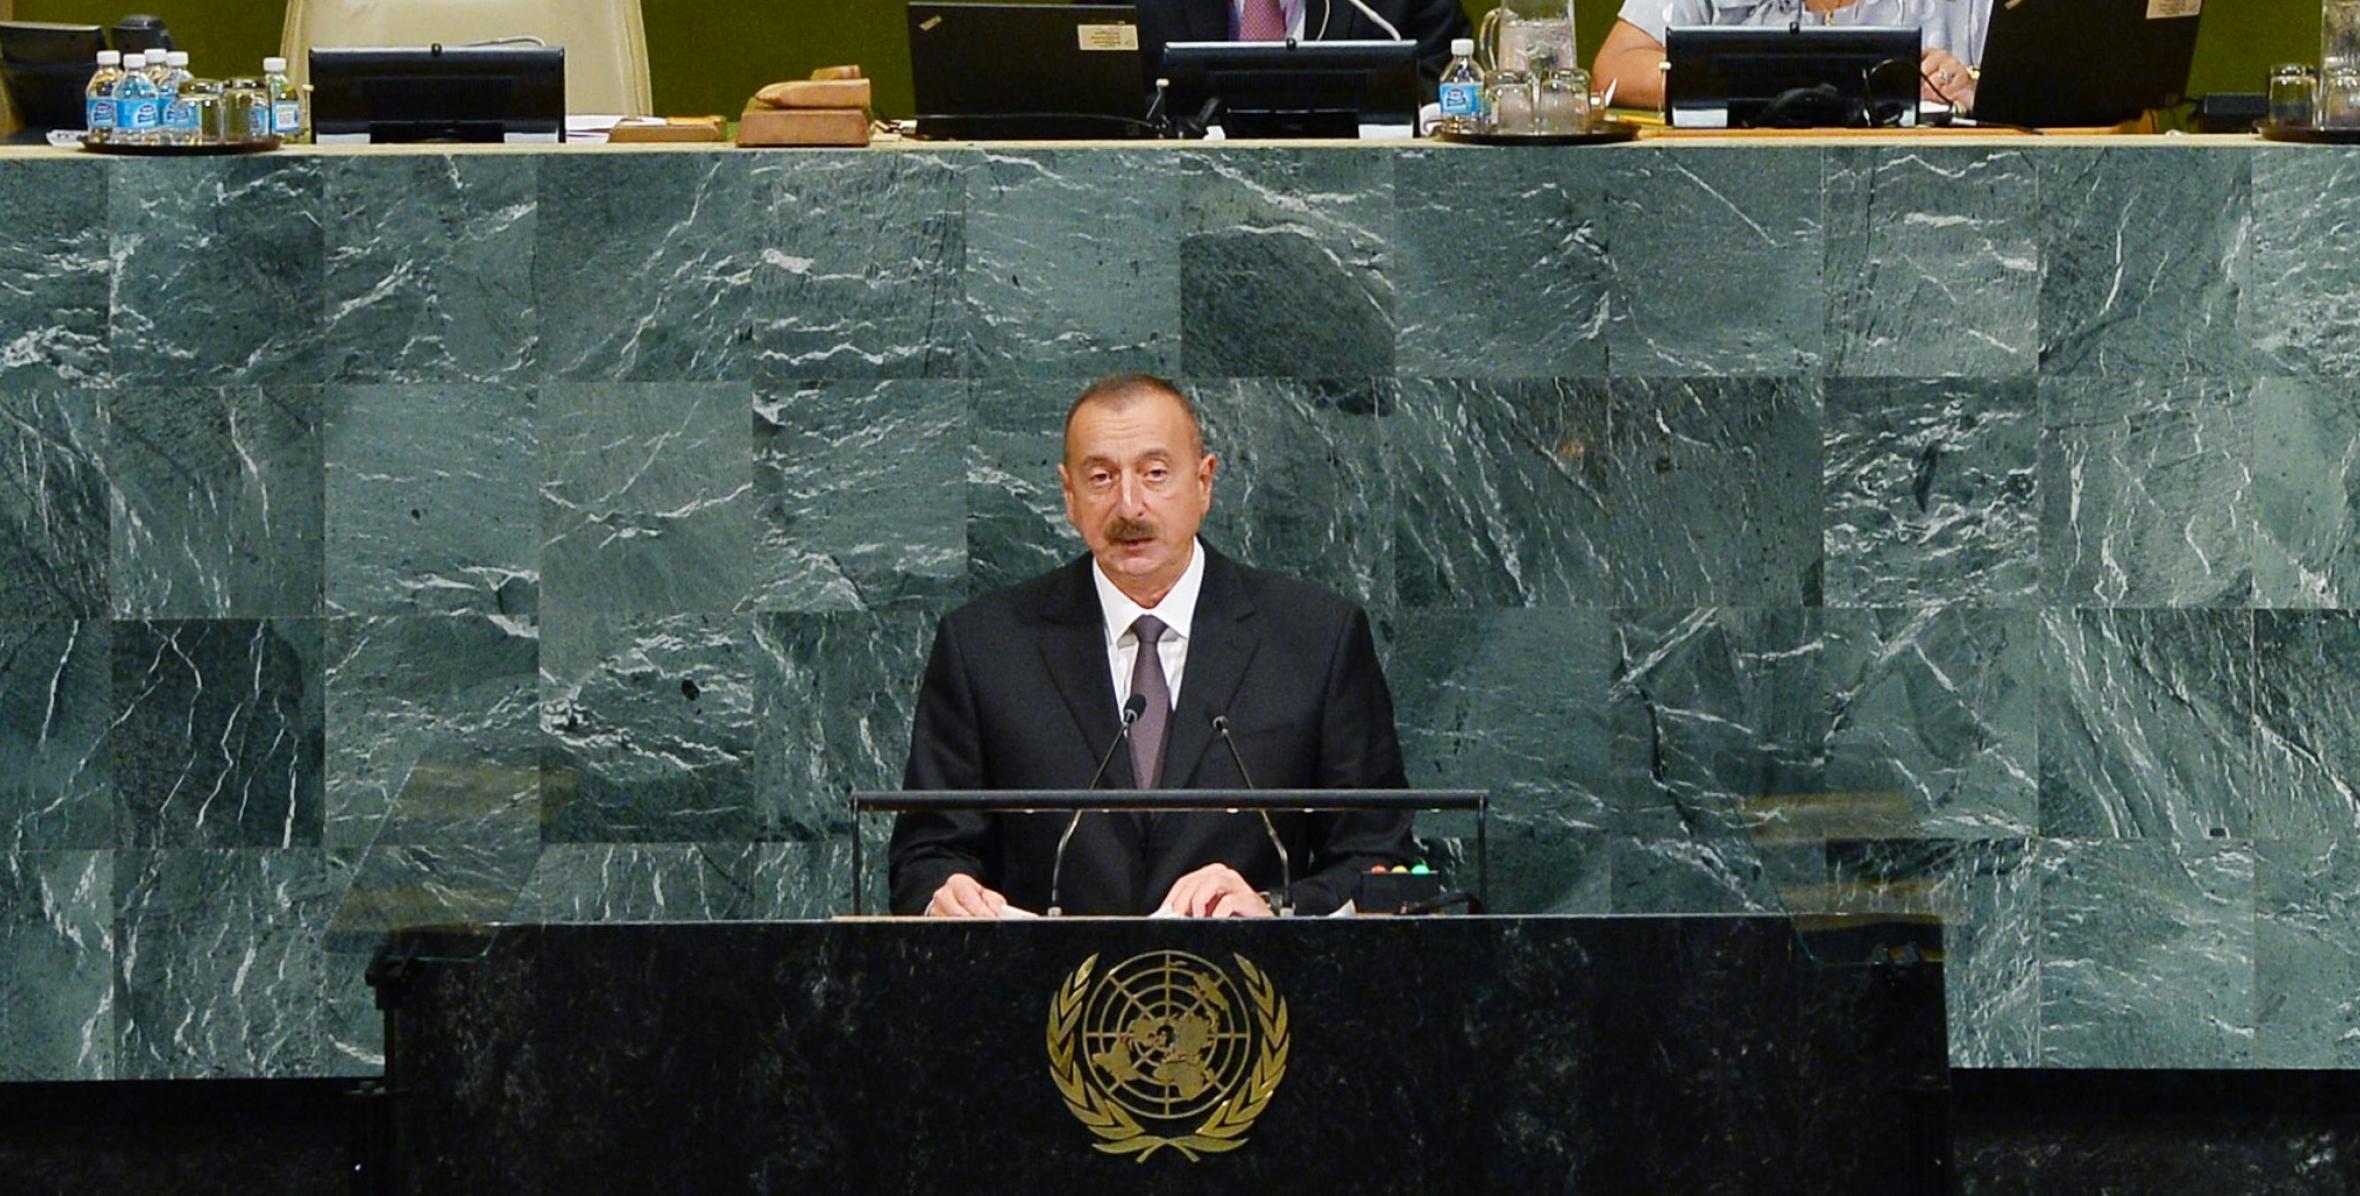 Speech by Ilham Aliyev at the opening of 72nd Session of UN General Assembly